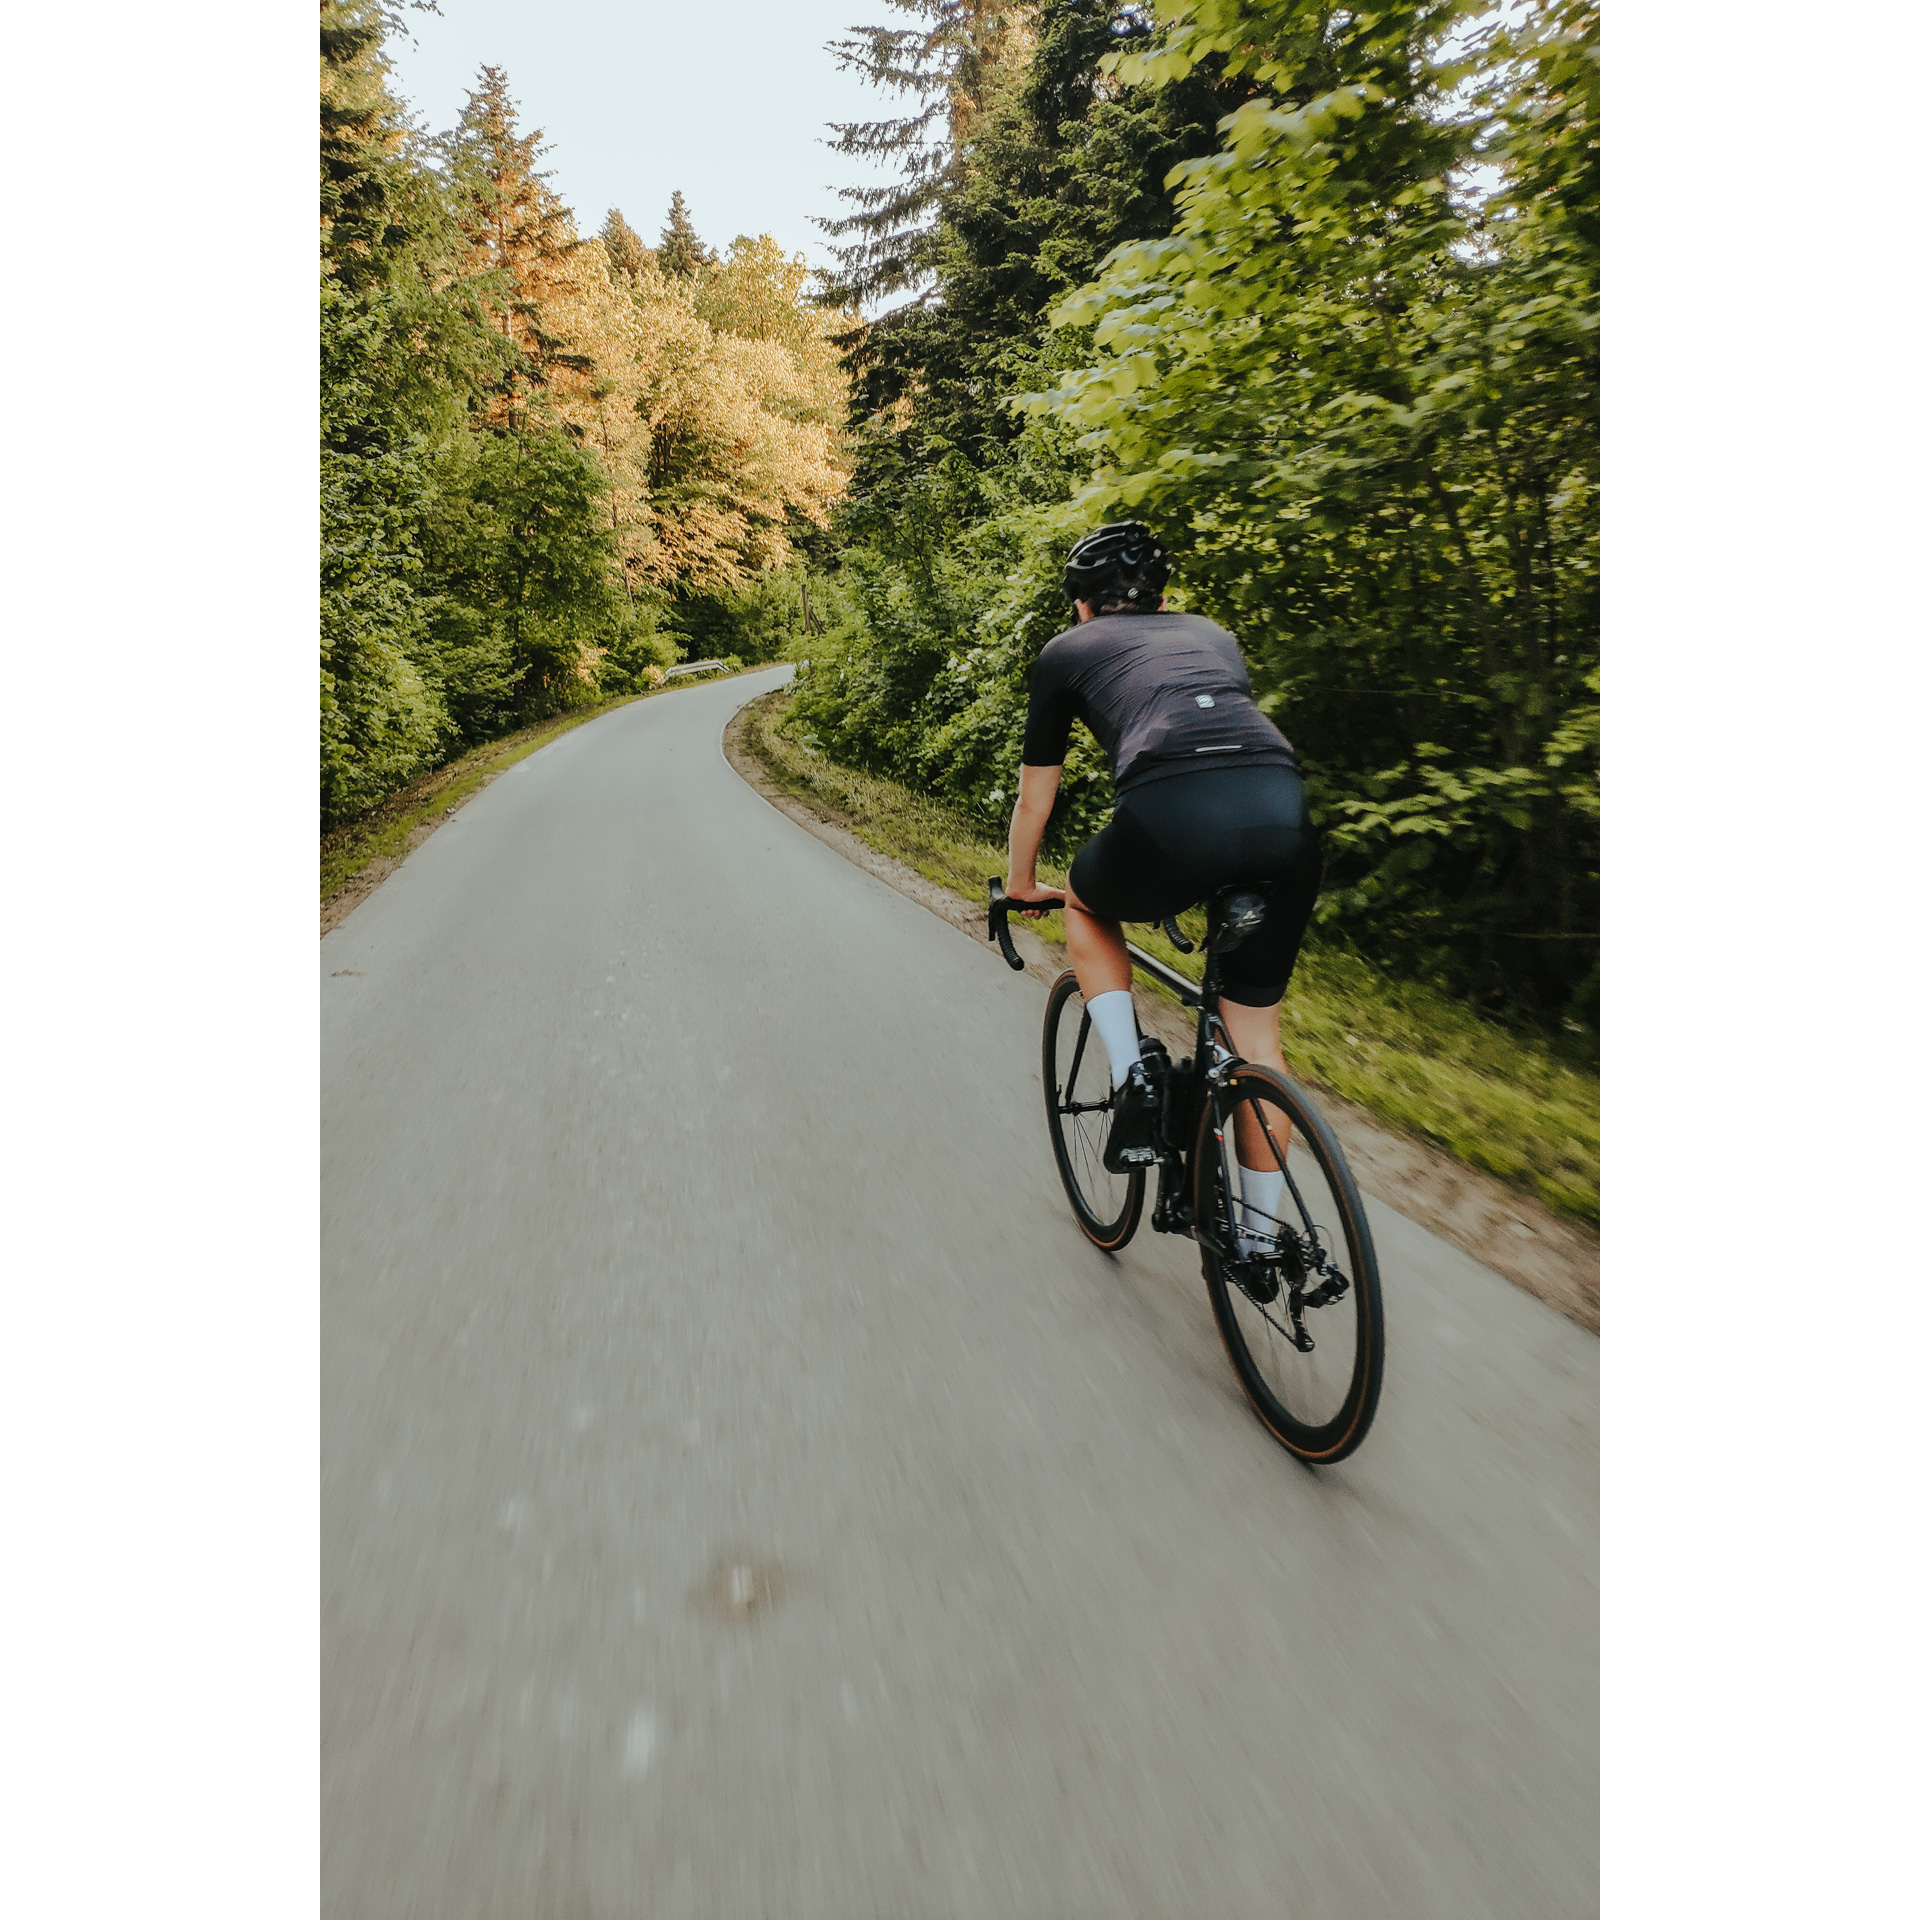 A cyclist in a black outfit riding an asphalt road through a forest full of trees with green leaves